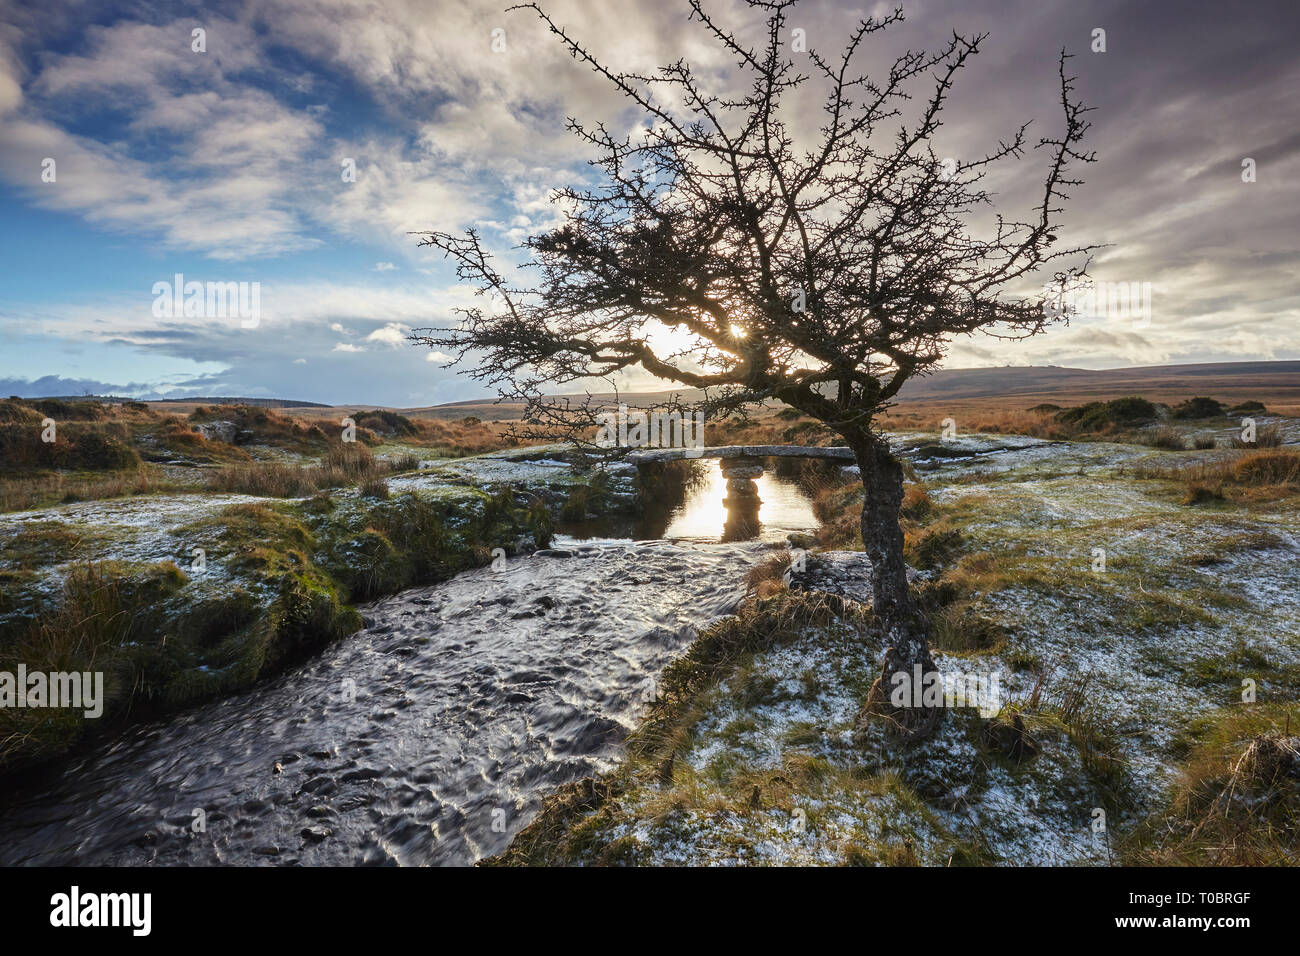 A wind-gnarled hawthorn tree stands alone beside the River Teign, on Gidleigh Common, Dartmoor National Park, Devon, Great Britain. Stock Photo